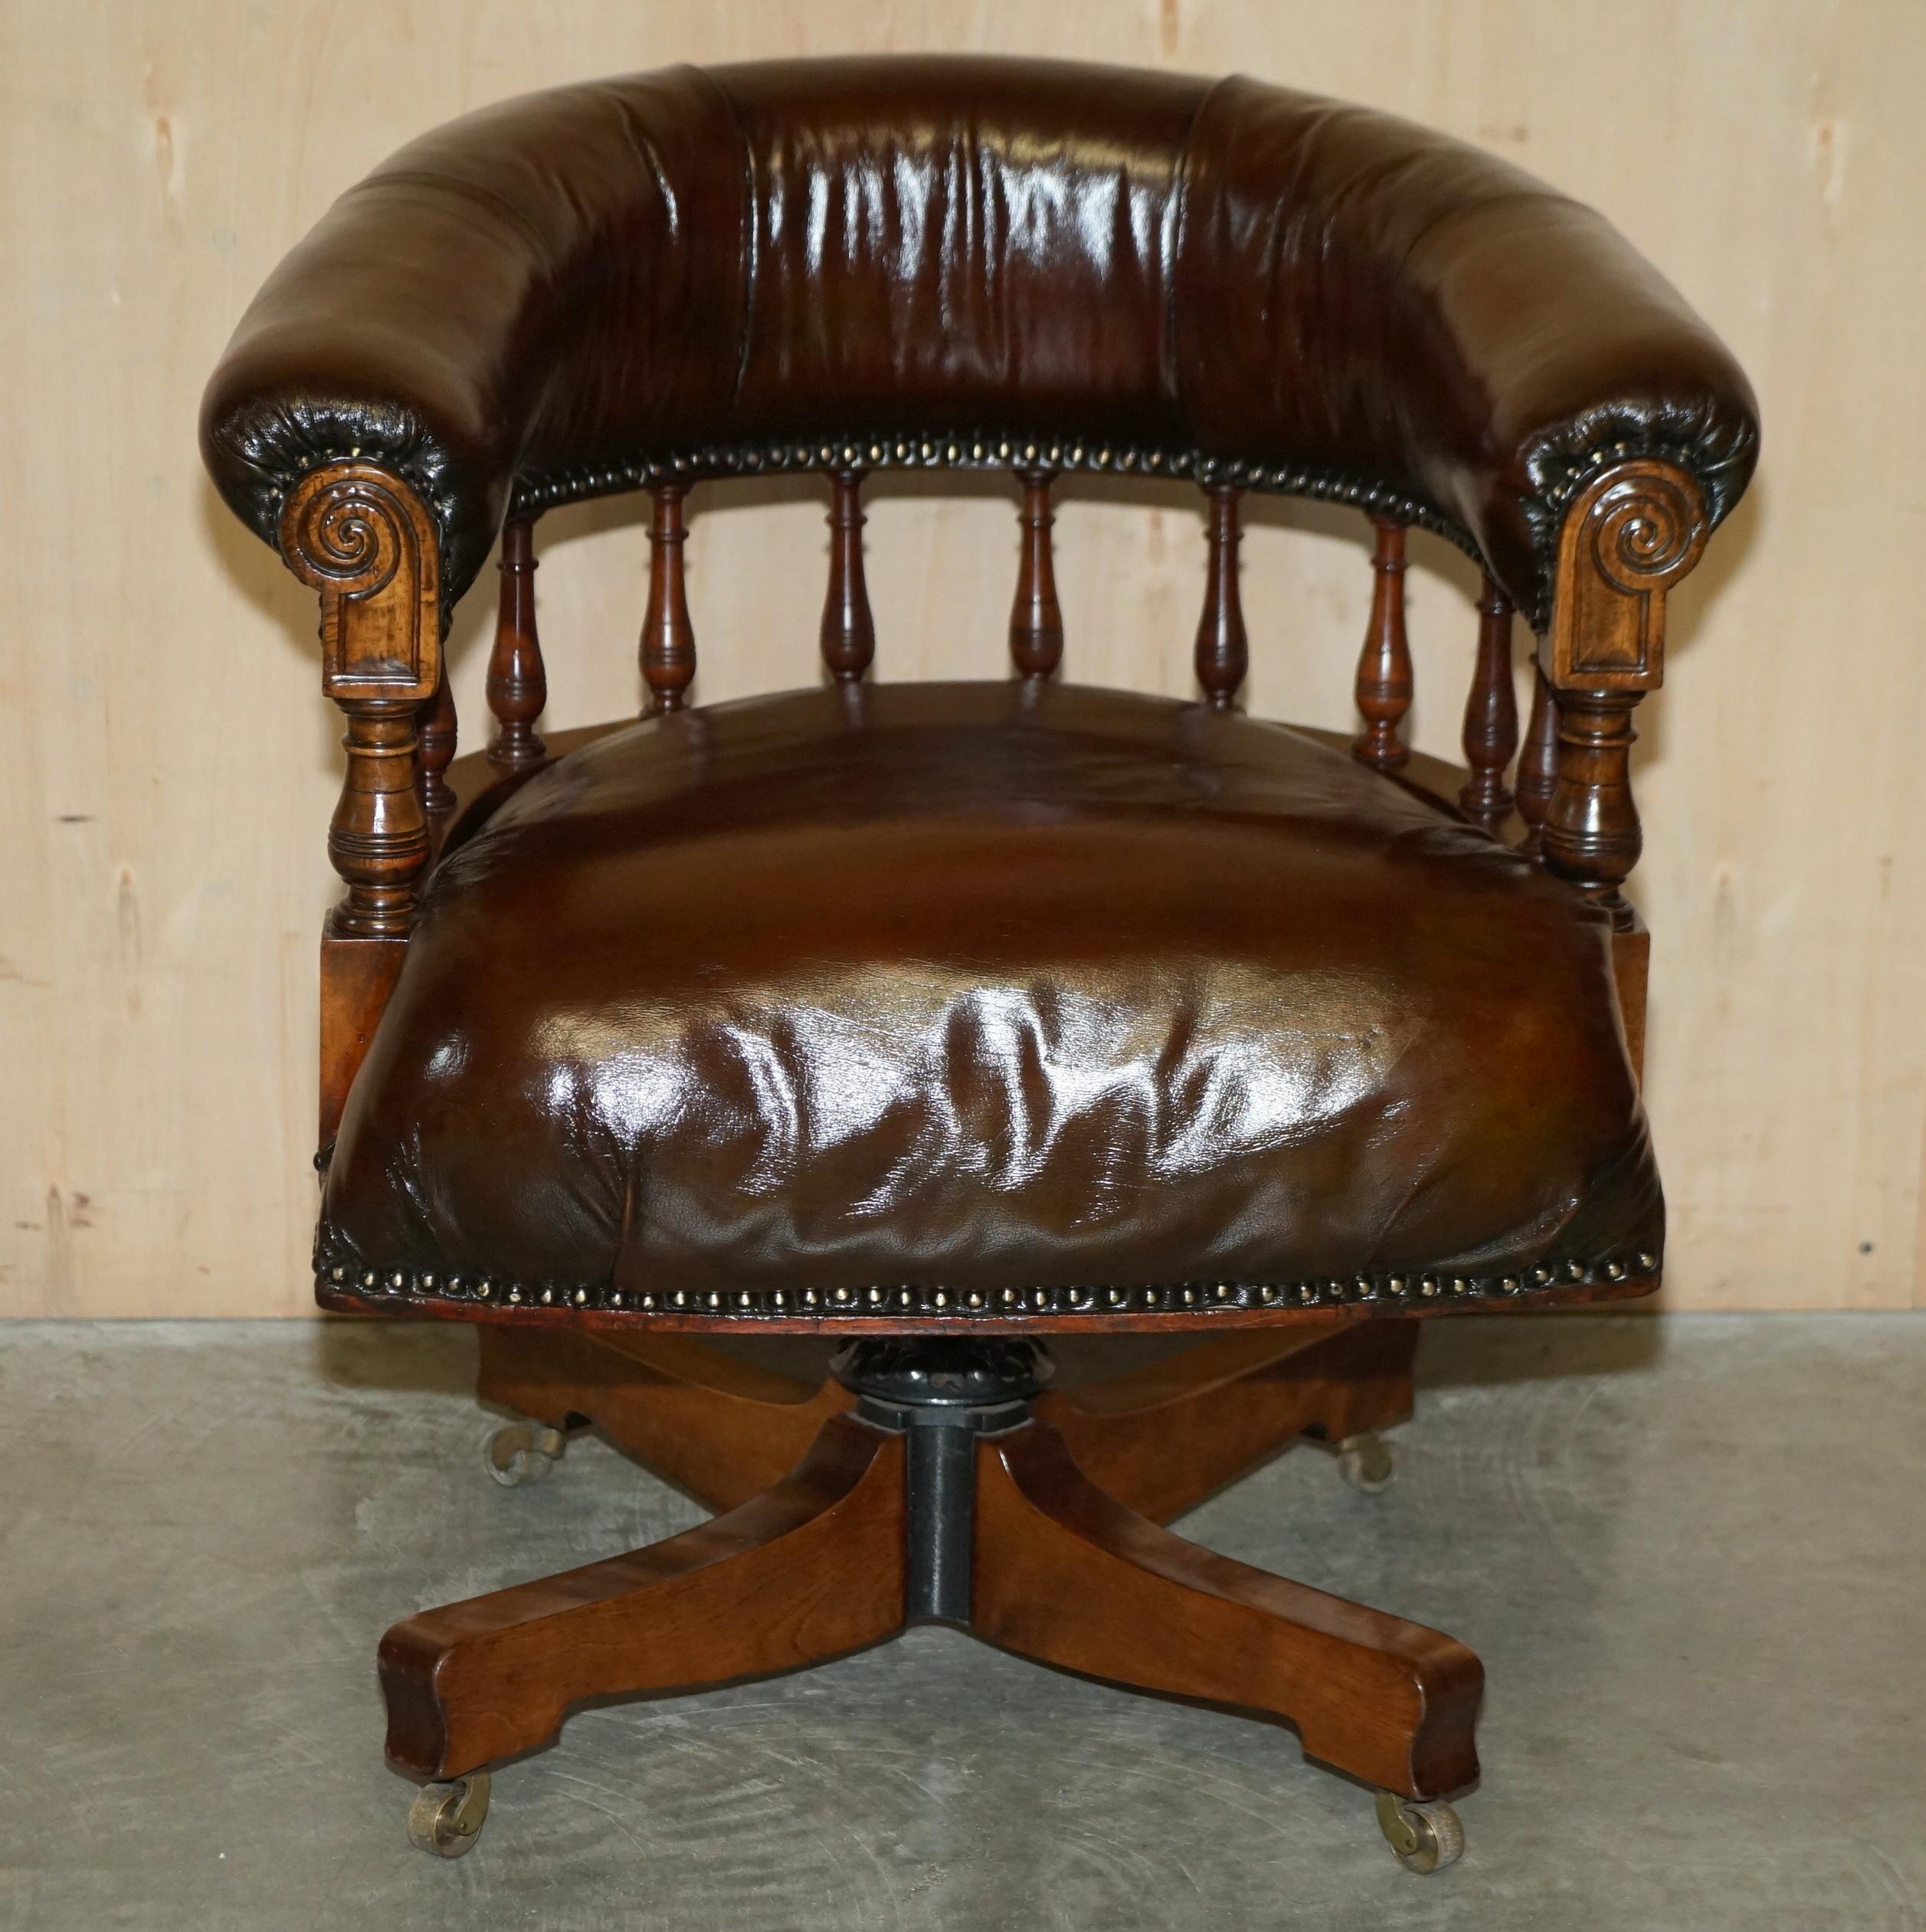 We are delighted to offer for sale this rare fully restored circa 1860 Barrell back hand dyed brown leather office chair.

This chair is really quite exquisite, it’s one of the earliest types of swivel chairs I have ever seen, the frame is solid